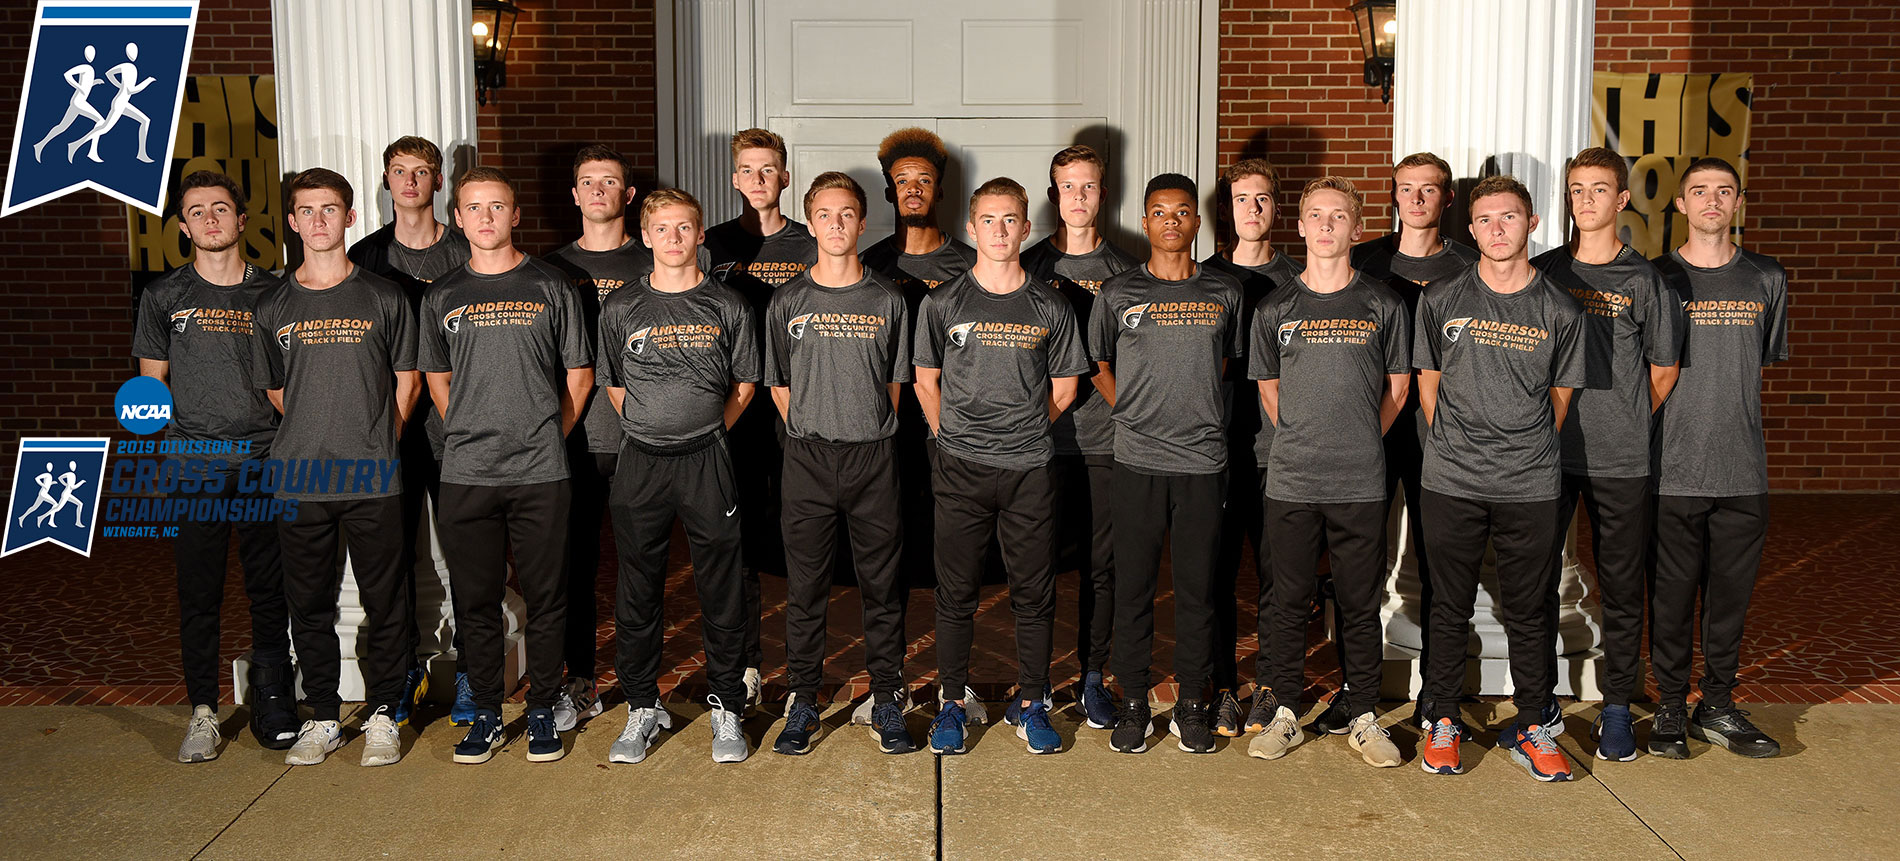 Men’s Cross Country Readies for NCAA Southeast Regionals